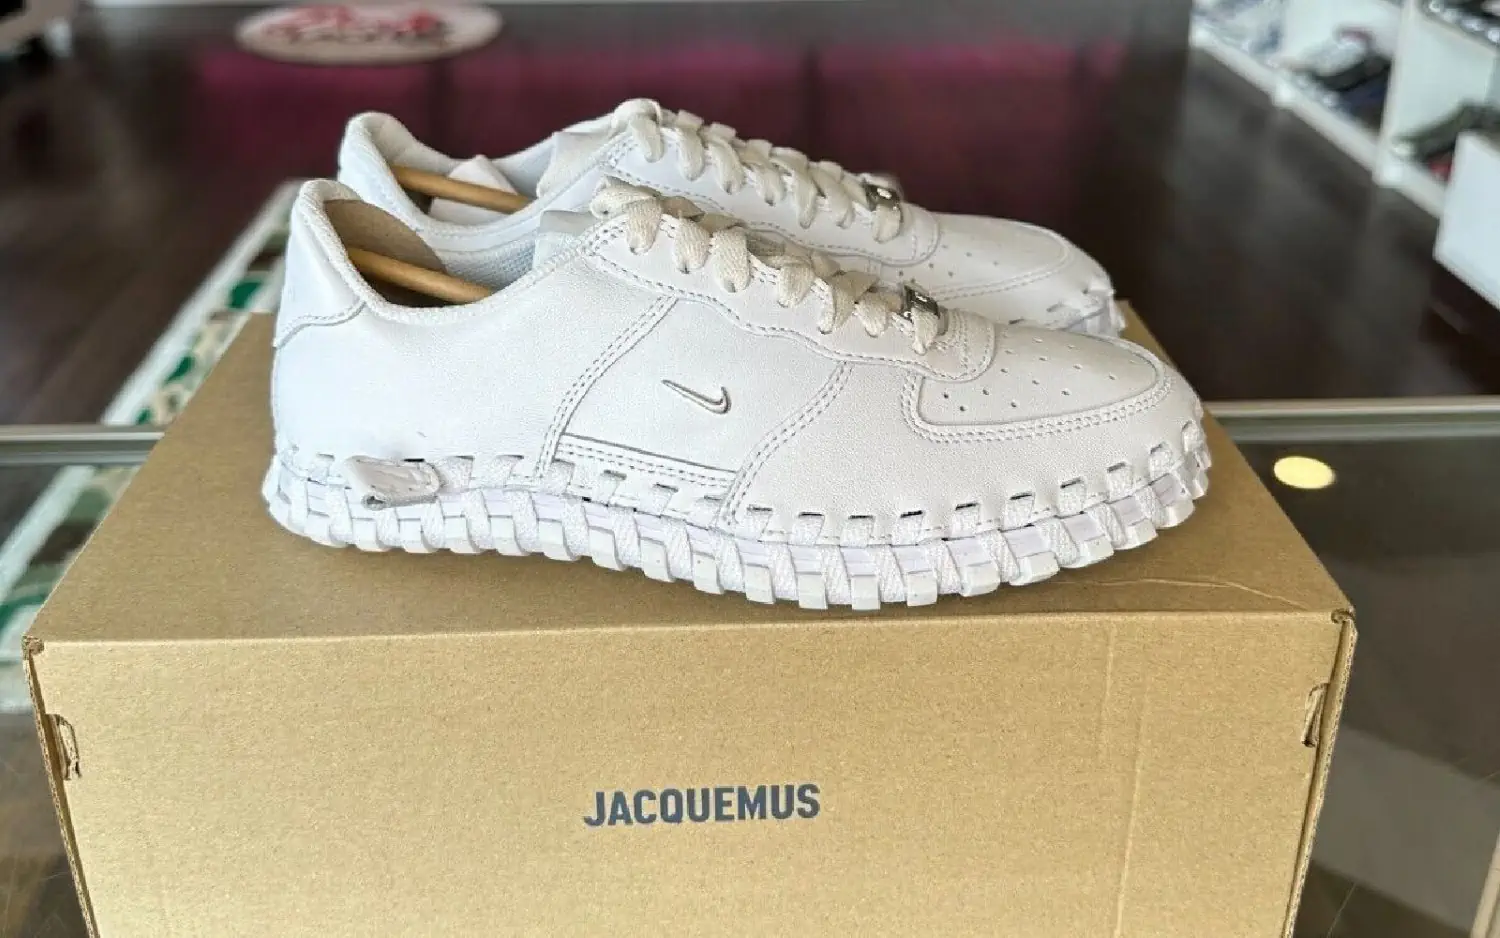 An early sneak peek into the Jacquemus x Nike J Force 1 Low collaboration